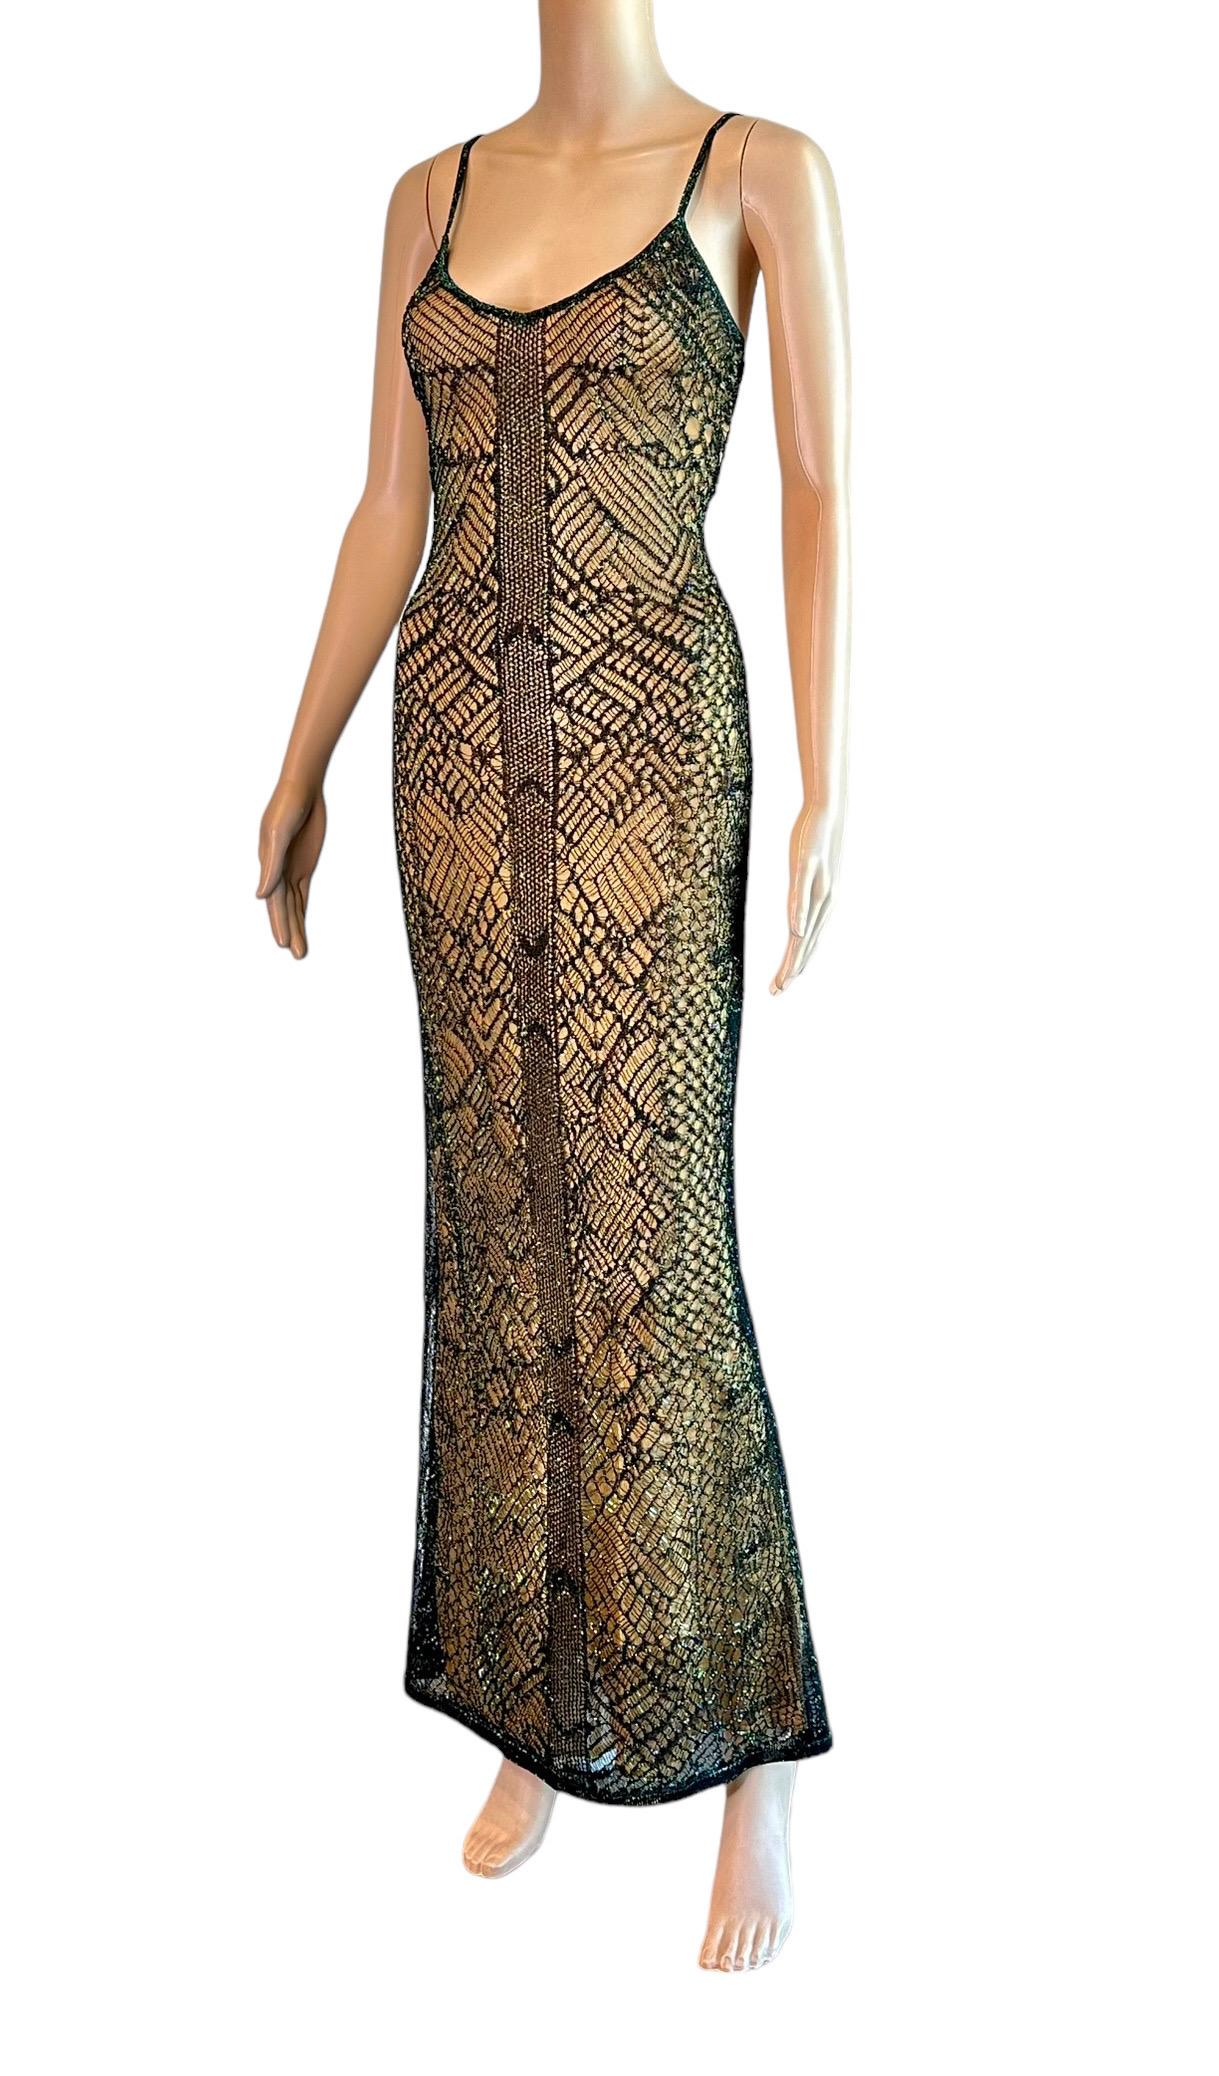 Women's Thierry Mugler Couture Vintage Semi-Sheer Open Knit Crochet Maxi Evening Dress  For Sale